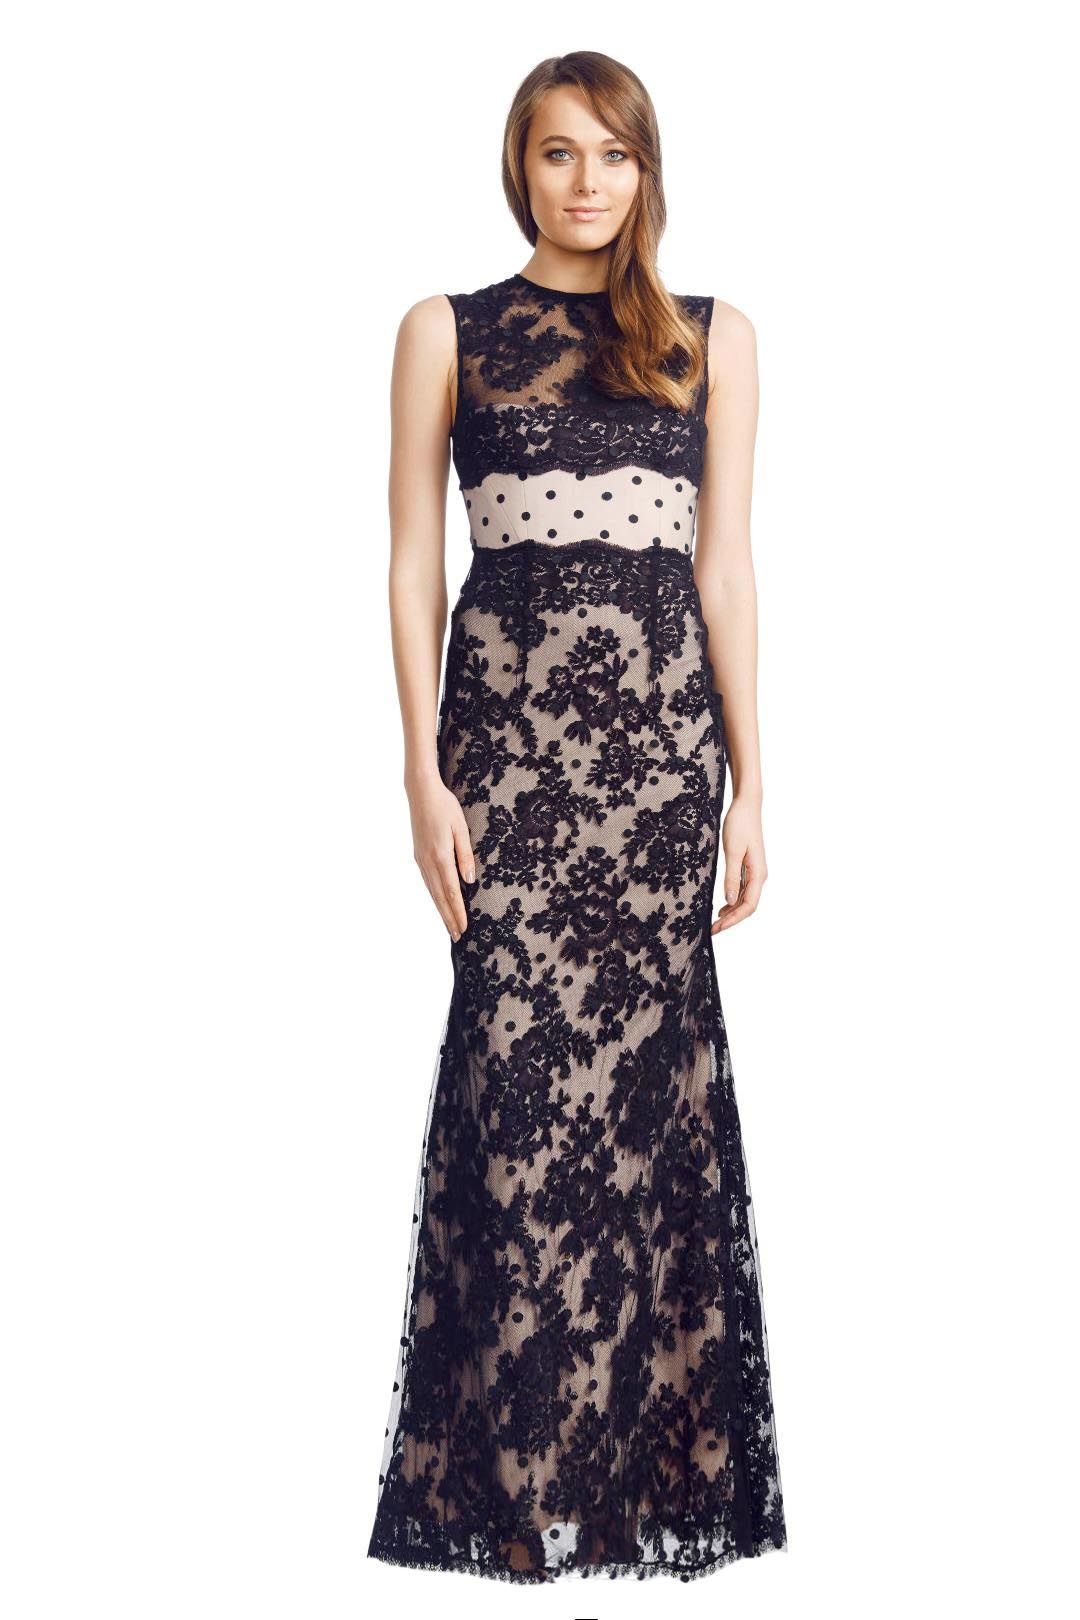 Alex Perry - Ancelina Gown - Black - Front